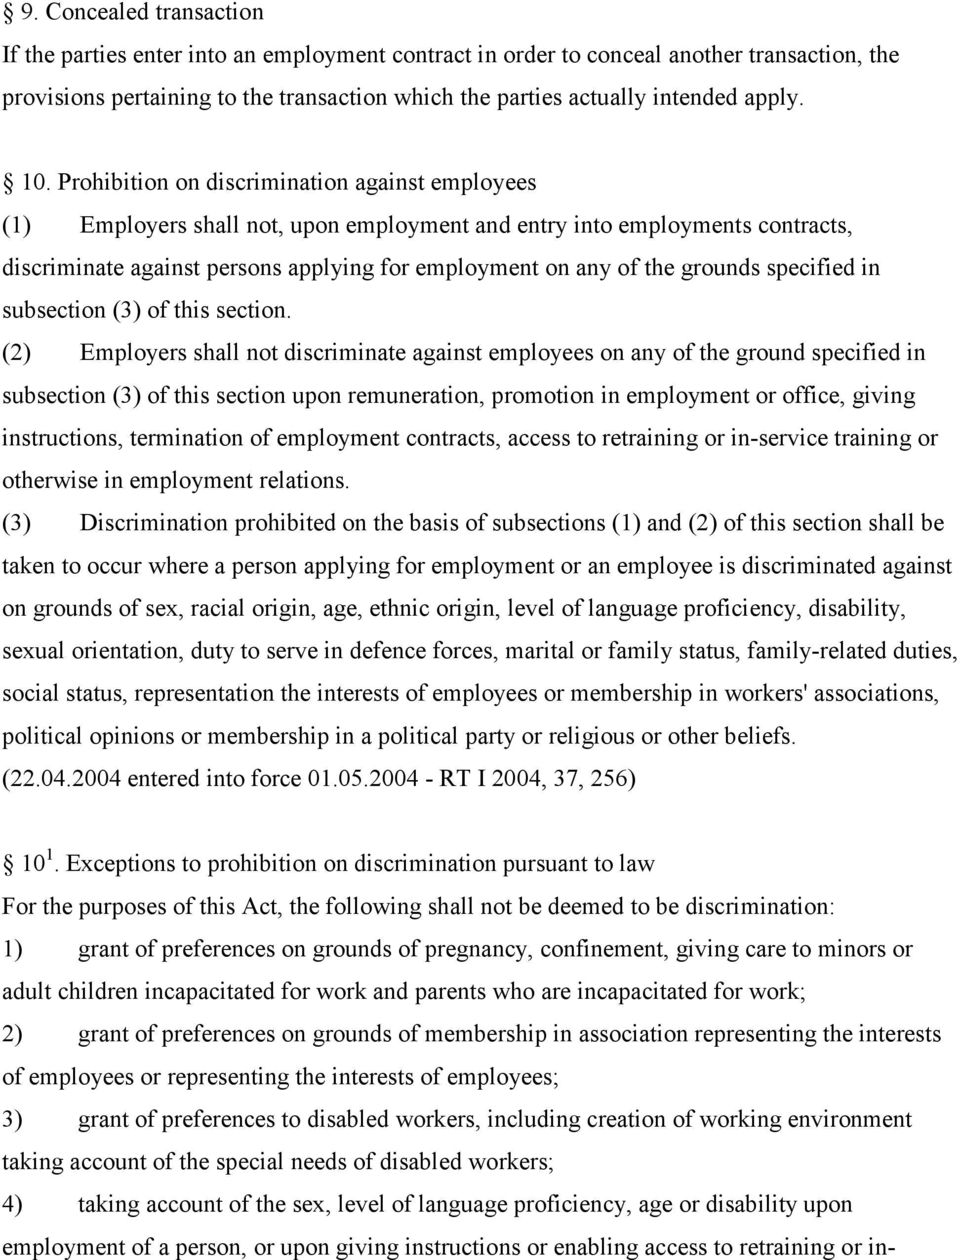 Prohibition on discrimination against employees (1) Employers shall not, upon employment and entry into employments contracts, discriminate against persons applying for employment on any of the